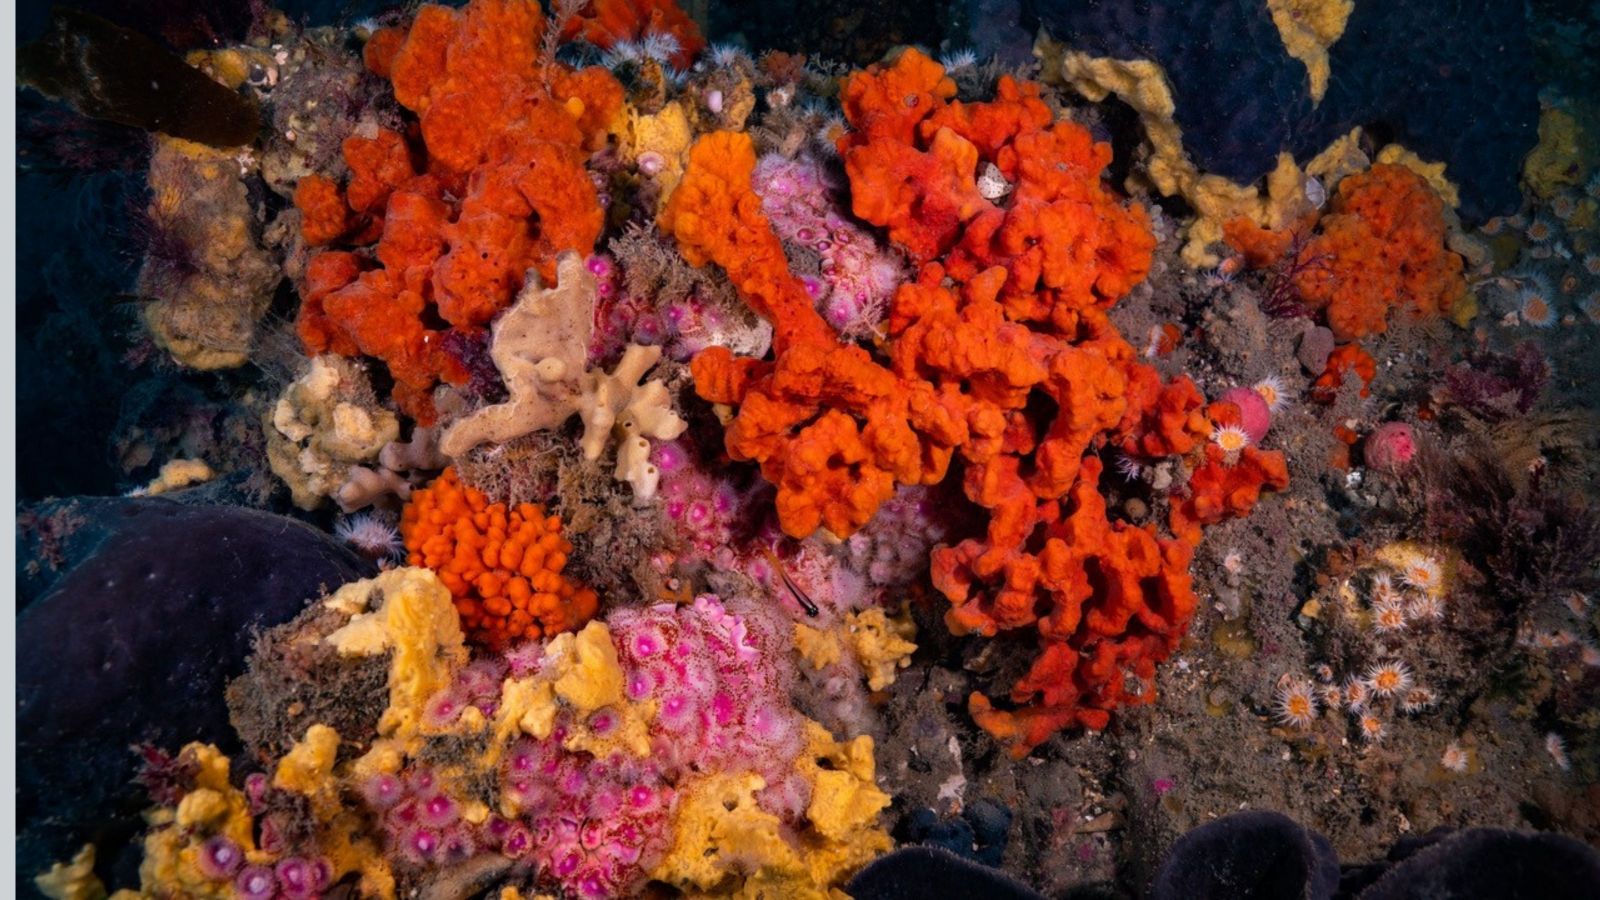 Brightly coloured coral underwater image